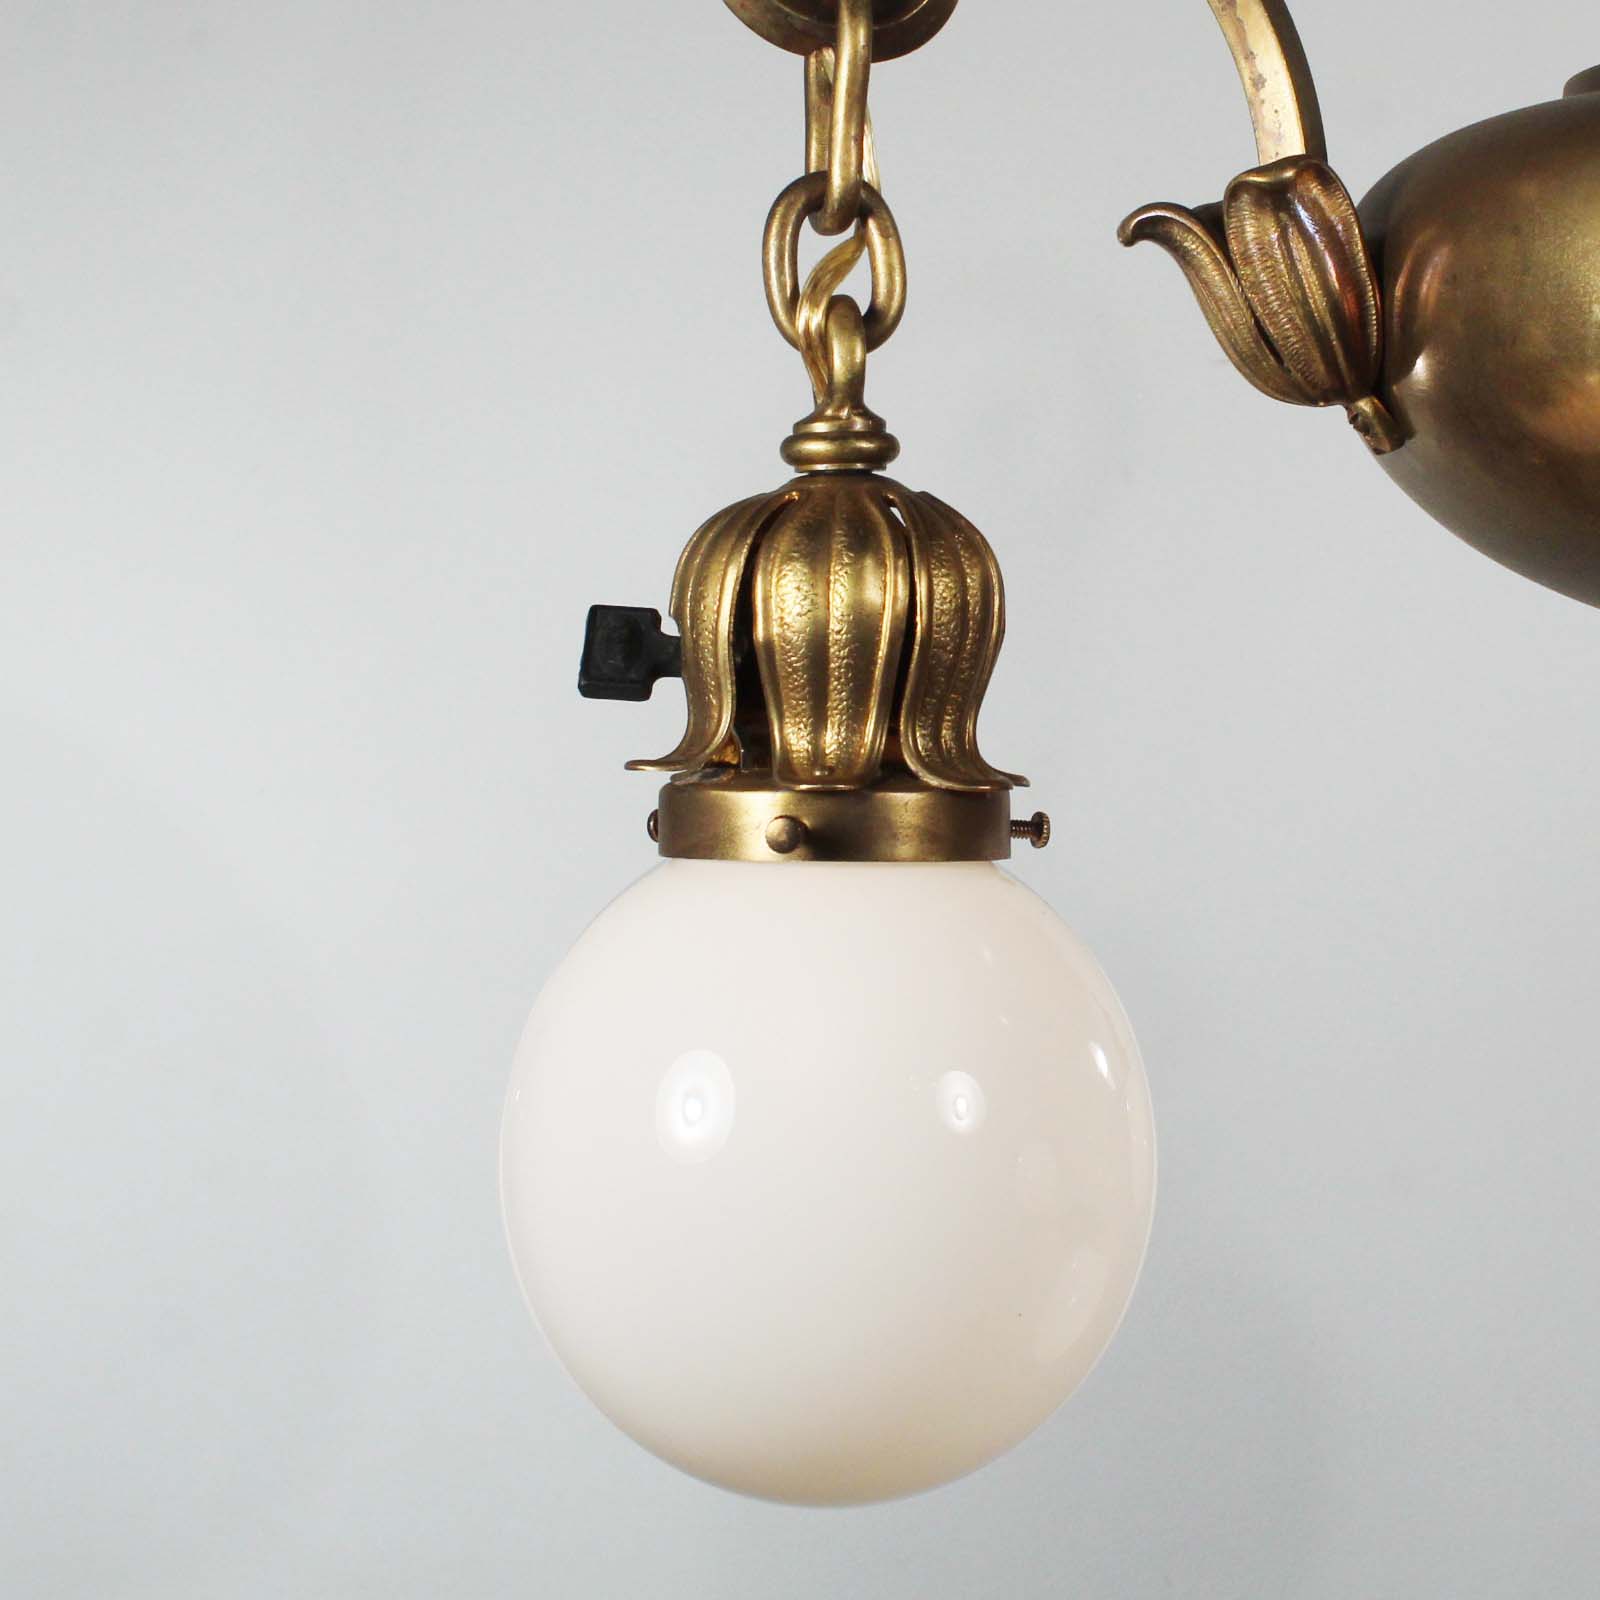 Antique Brass Chandelier with Glass Ball Shades, Early 1900s-71188